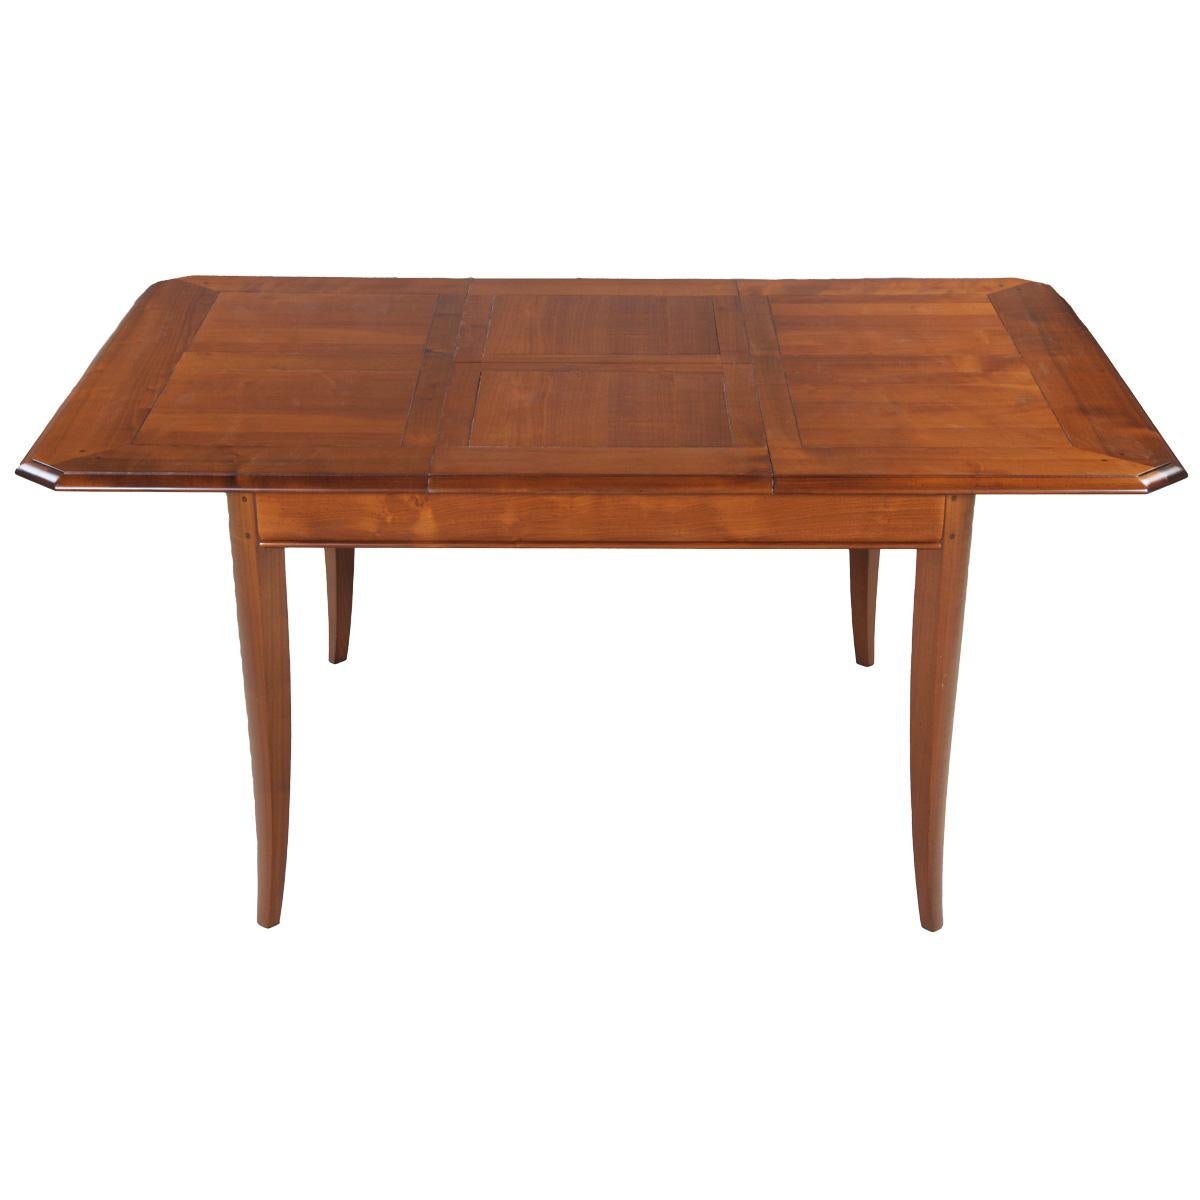 Contemporary Square Dining Table with Extension in Solid Cherry, French Countryside Style For Sale